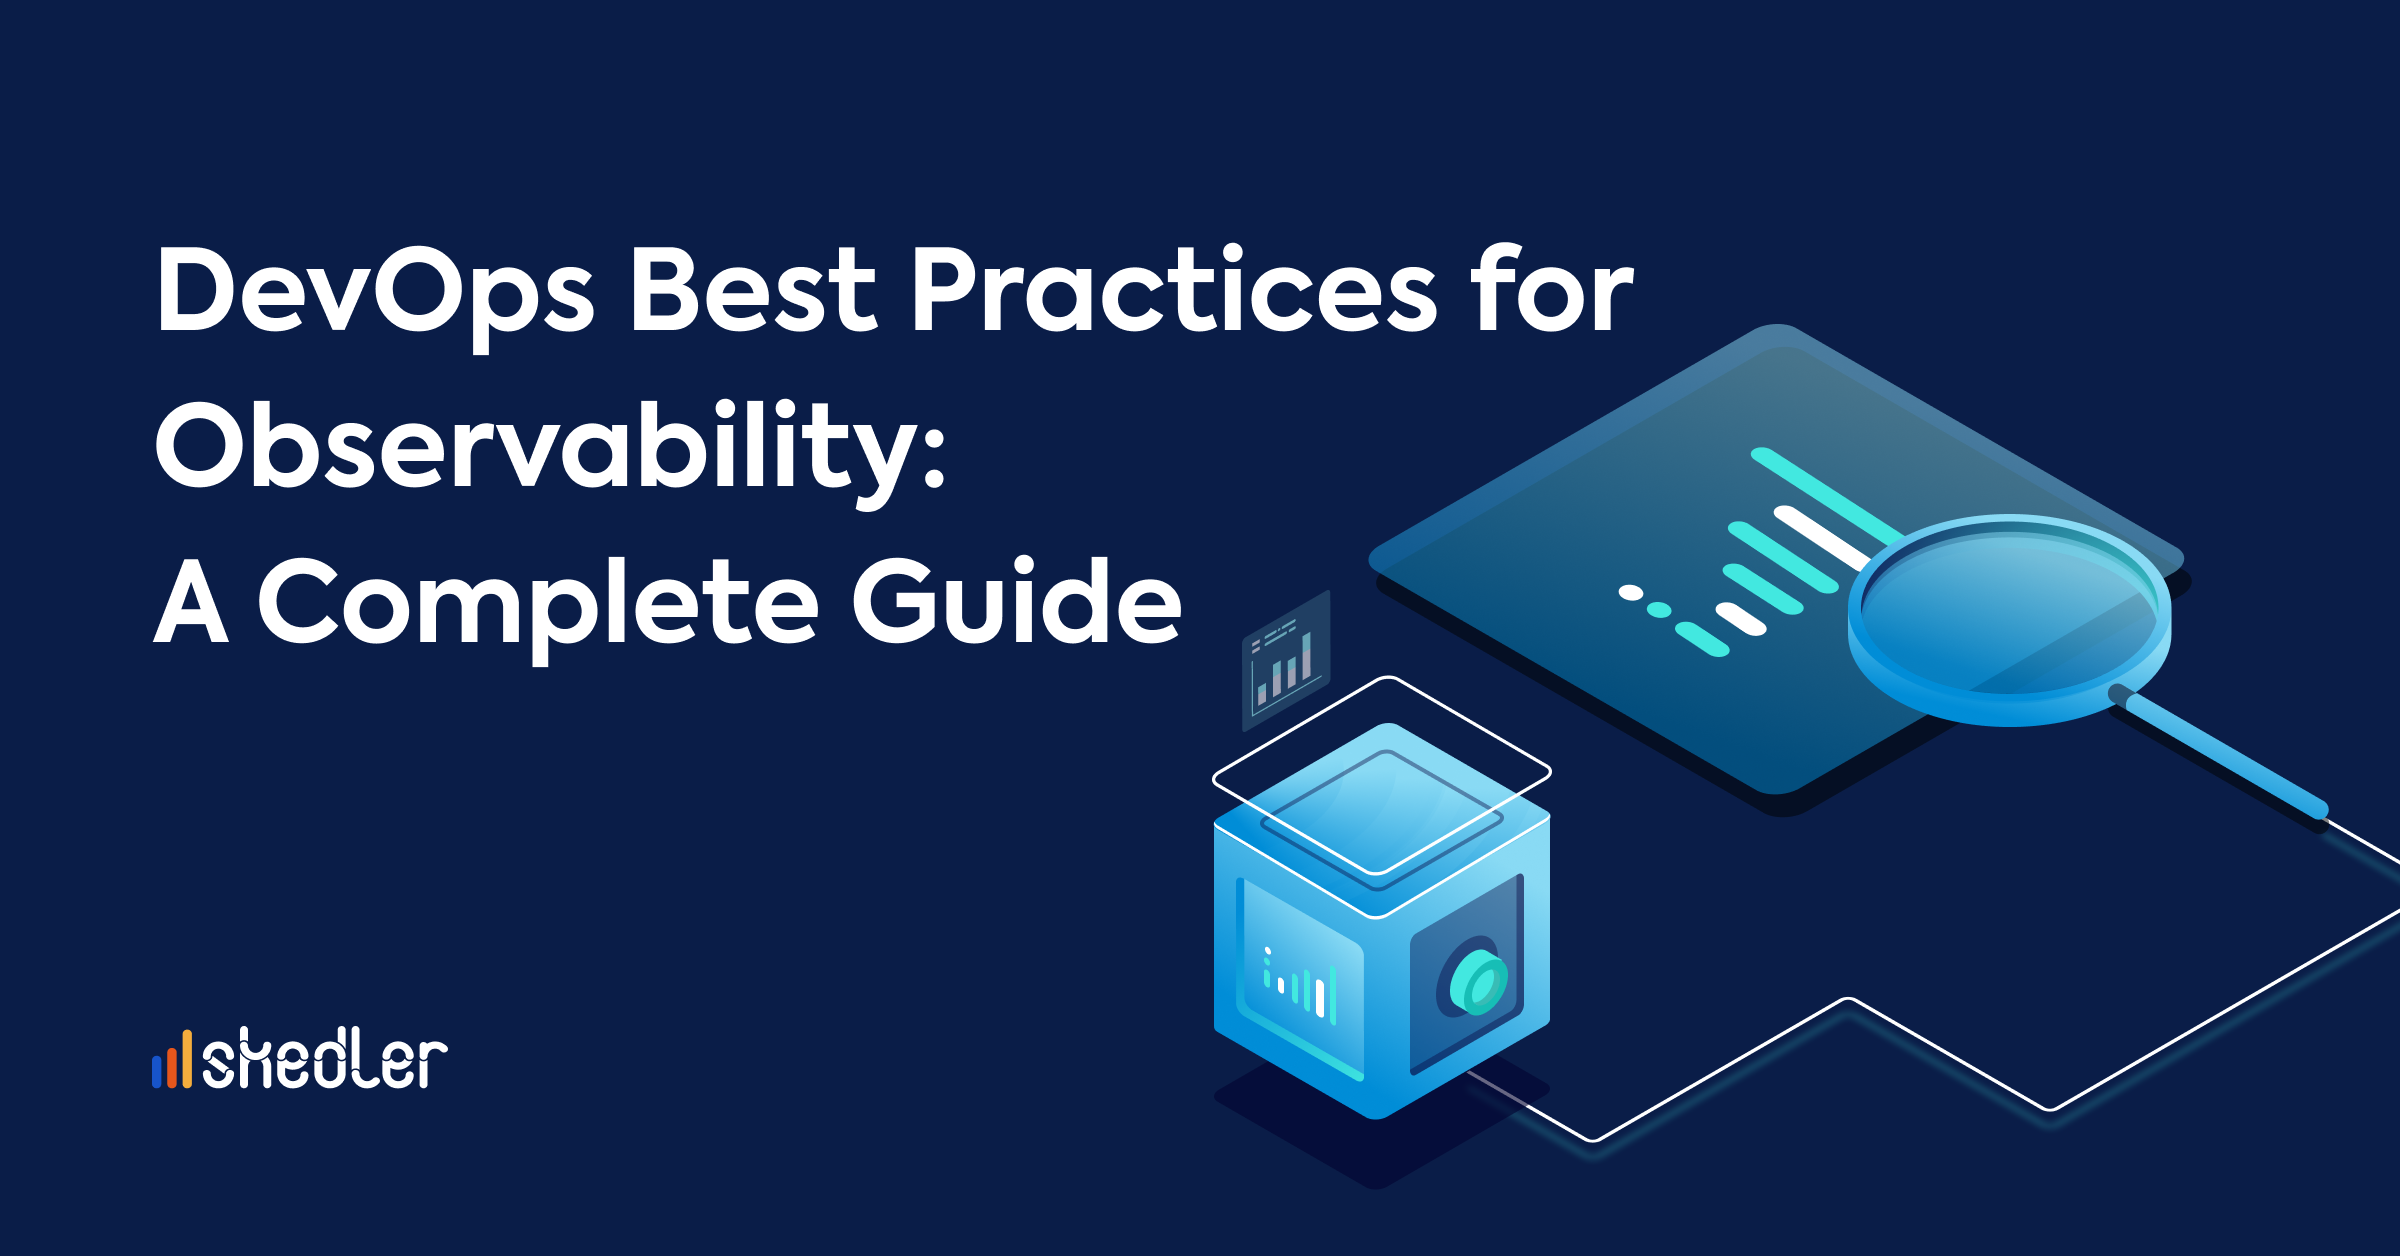 DevOps Best Practices for Observability: A Complete Guide